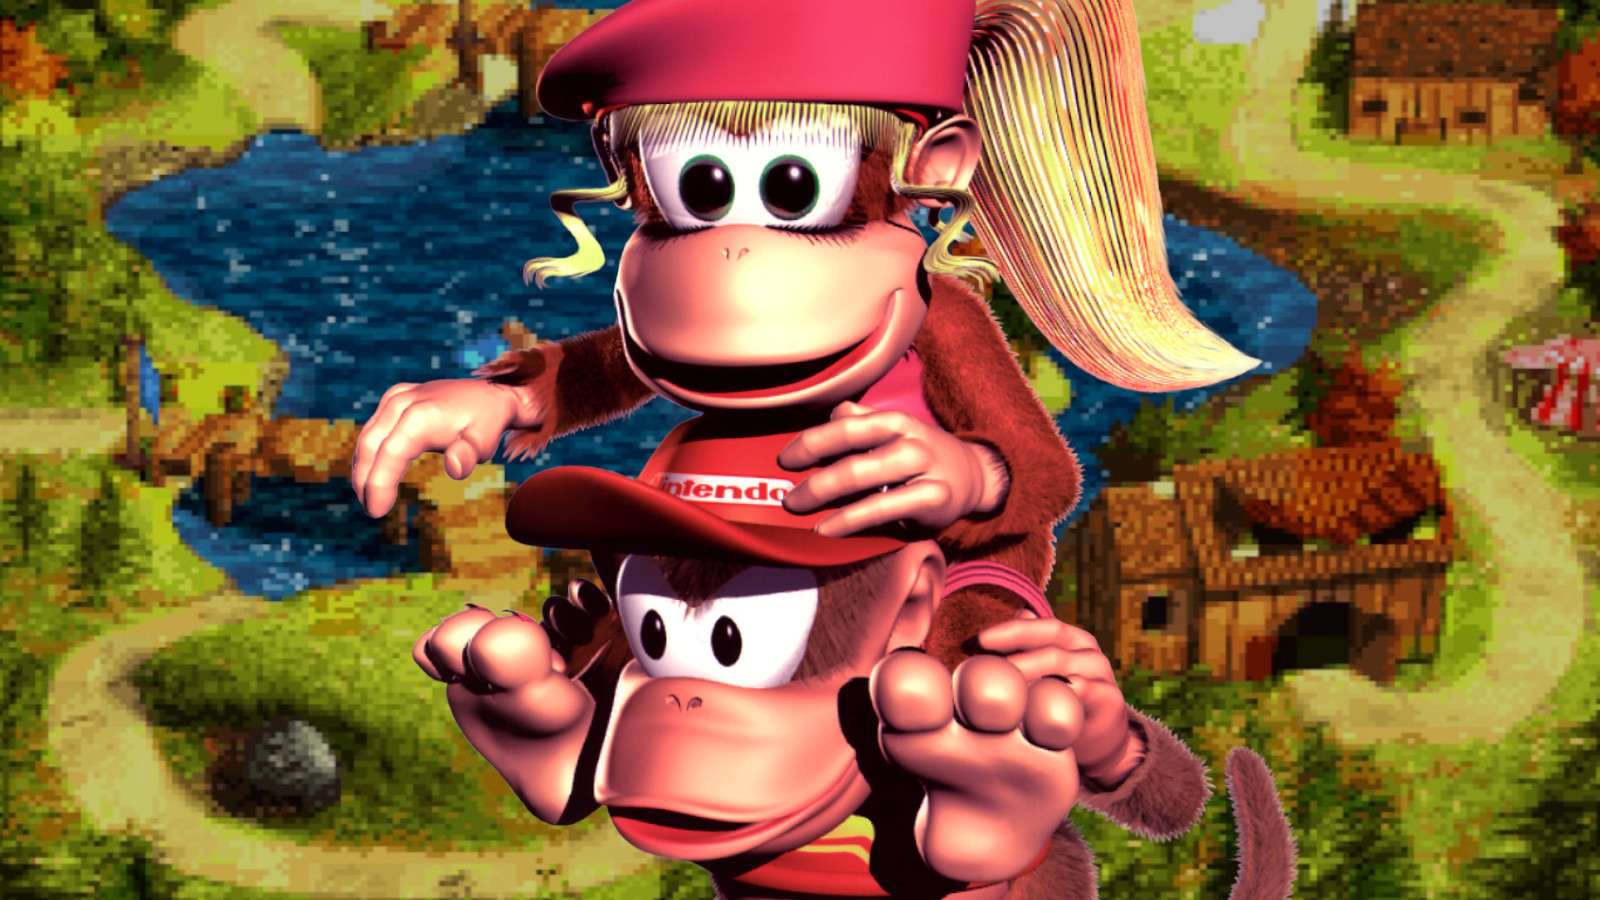 Dixie and Diddy Kong